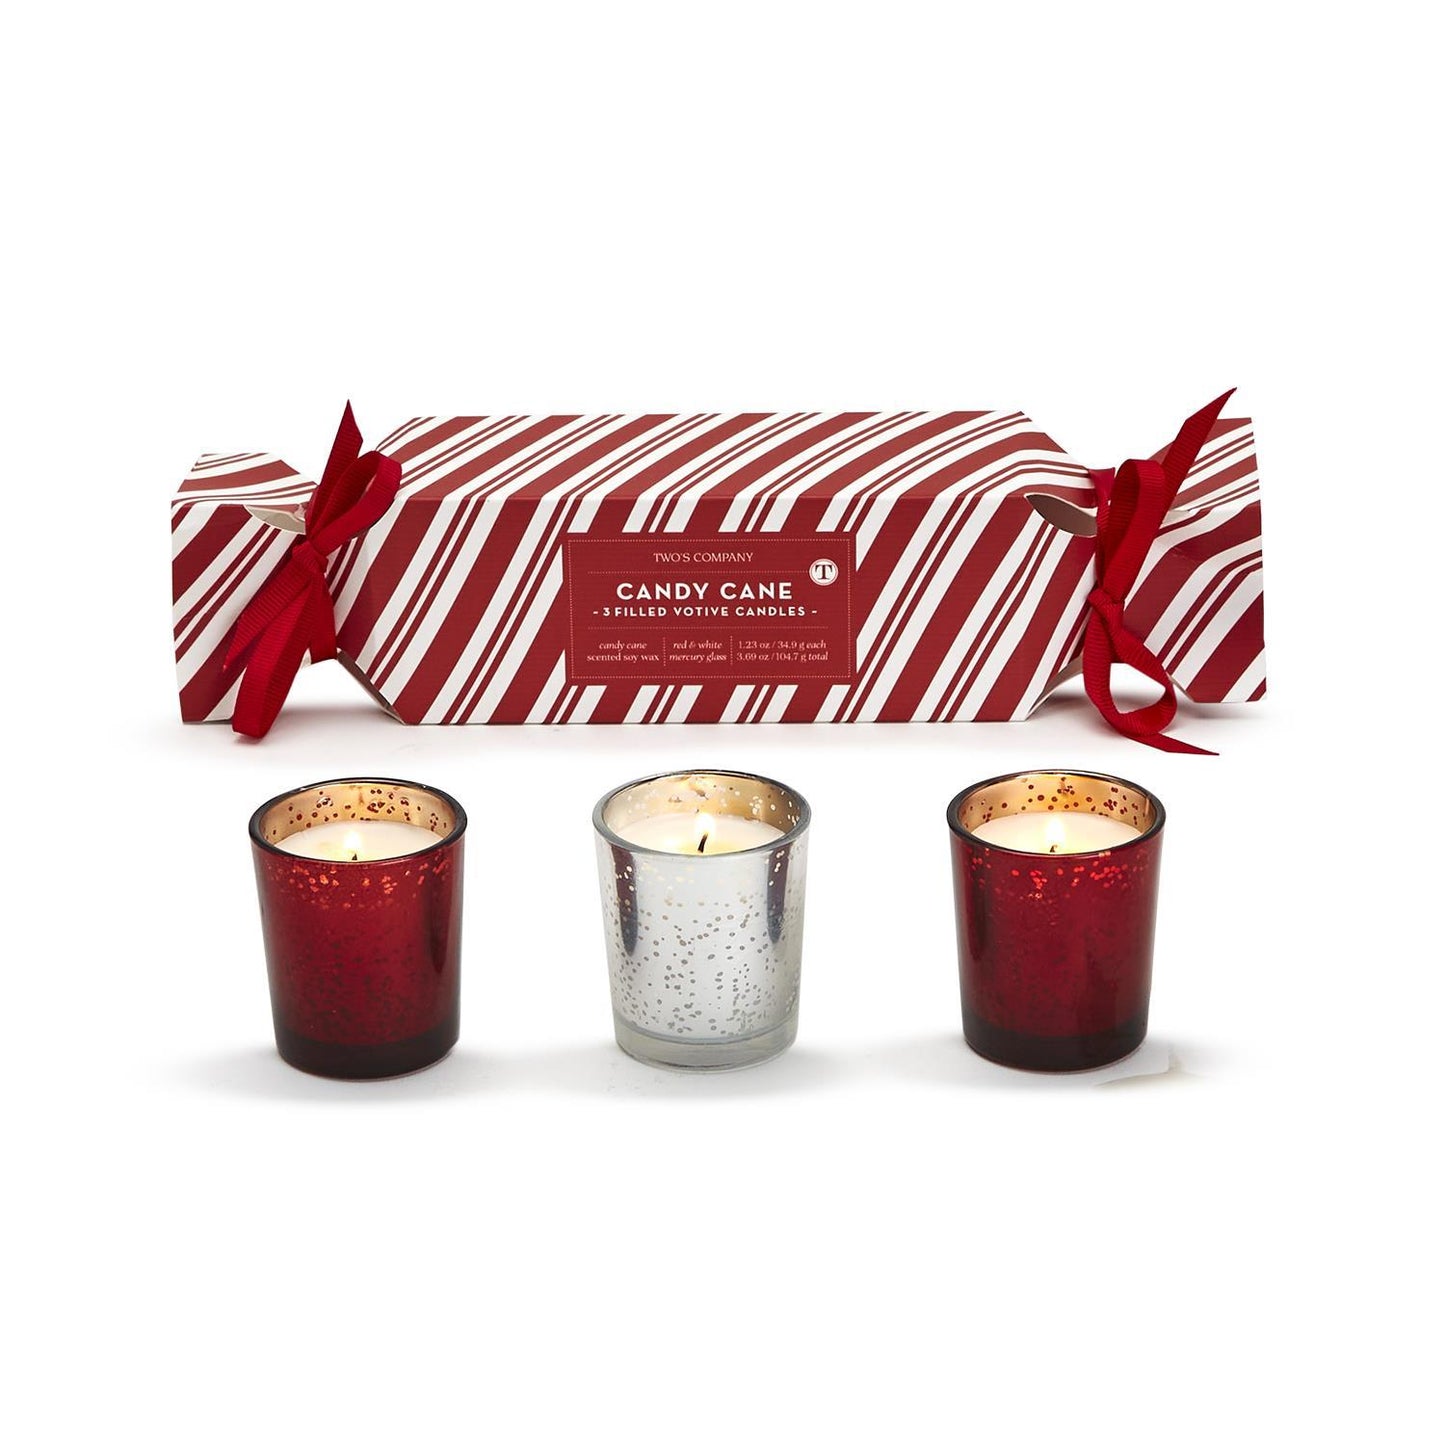 Candy Cane Cracker Scented Candles, Set of 3